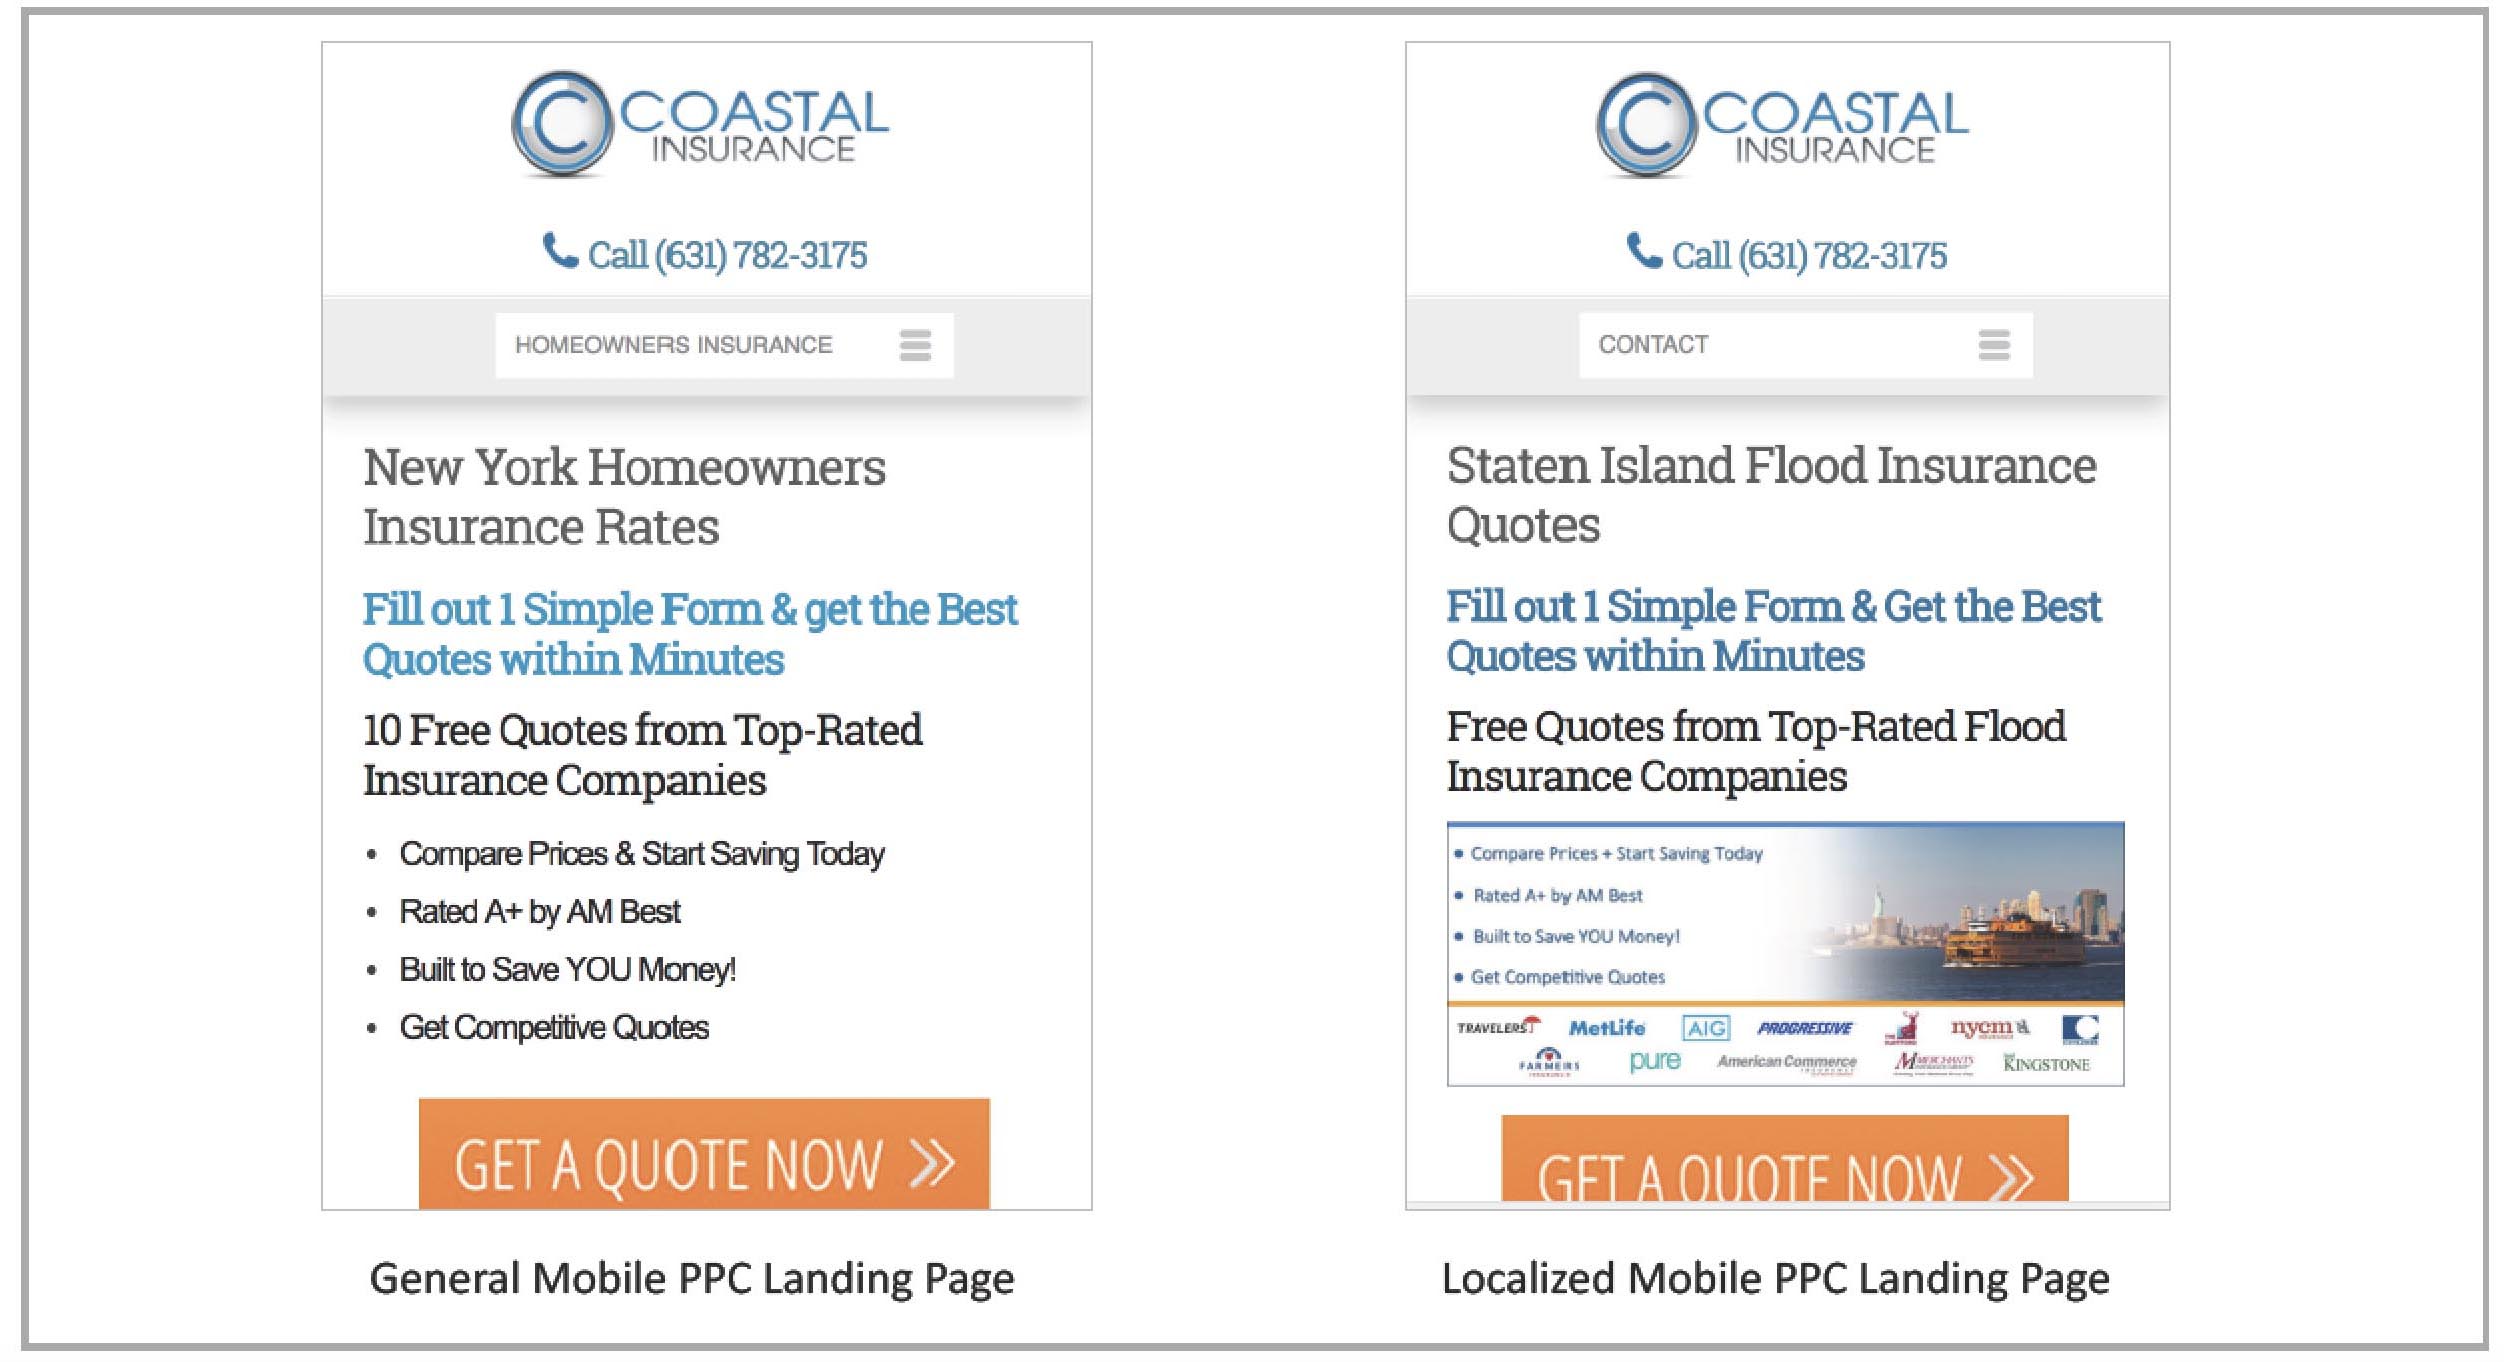 Coastal General Mobile PPC Landing Page and Localized Mobile PPC Landing Page